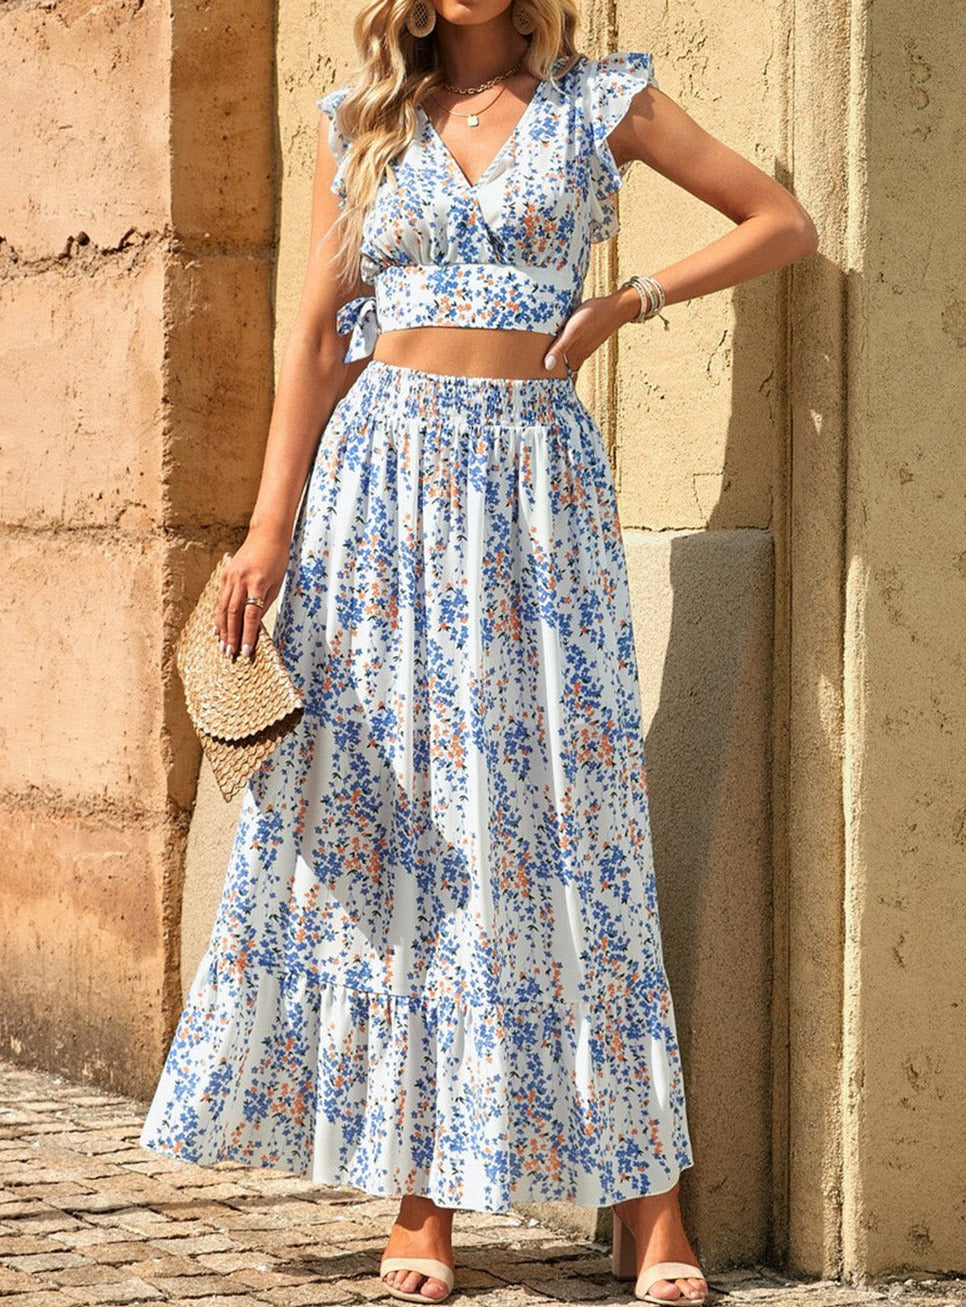 Floridian Crop Top and Maxi Skirt Set - Cheeky Chic Boutique